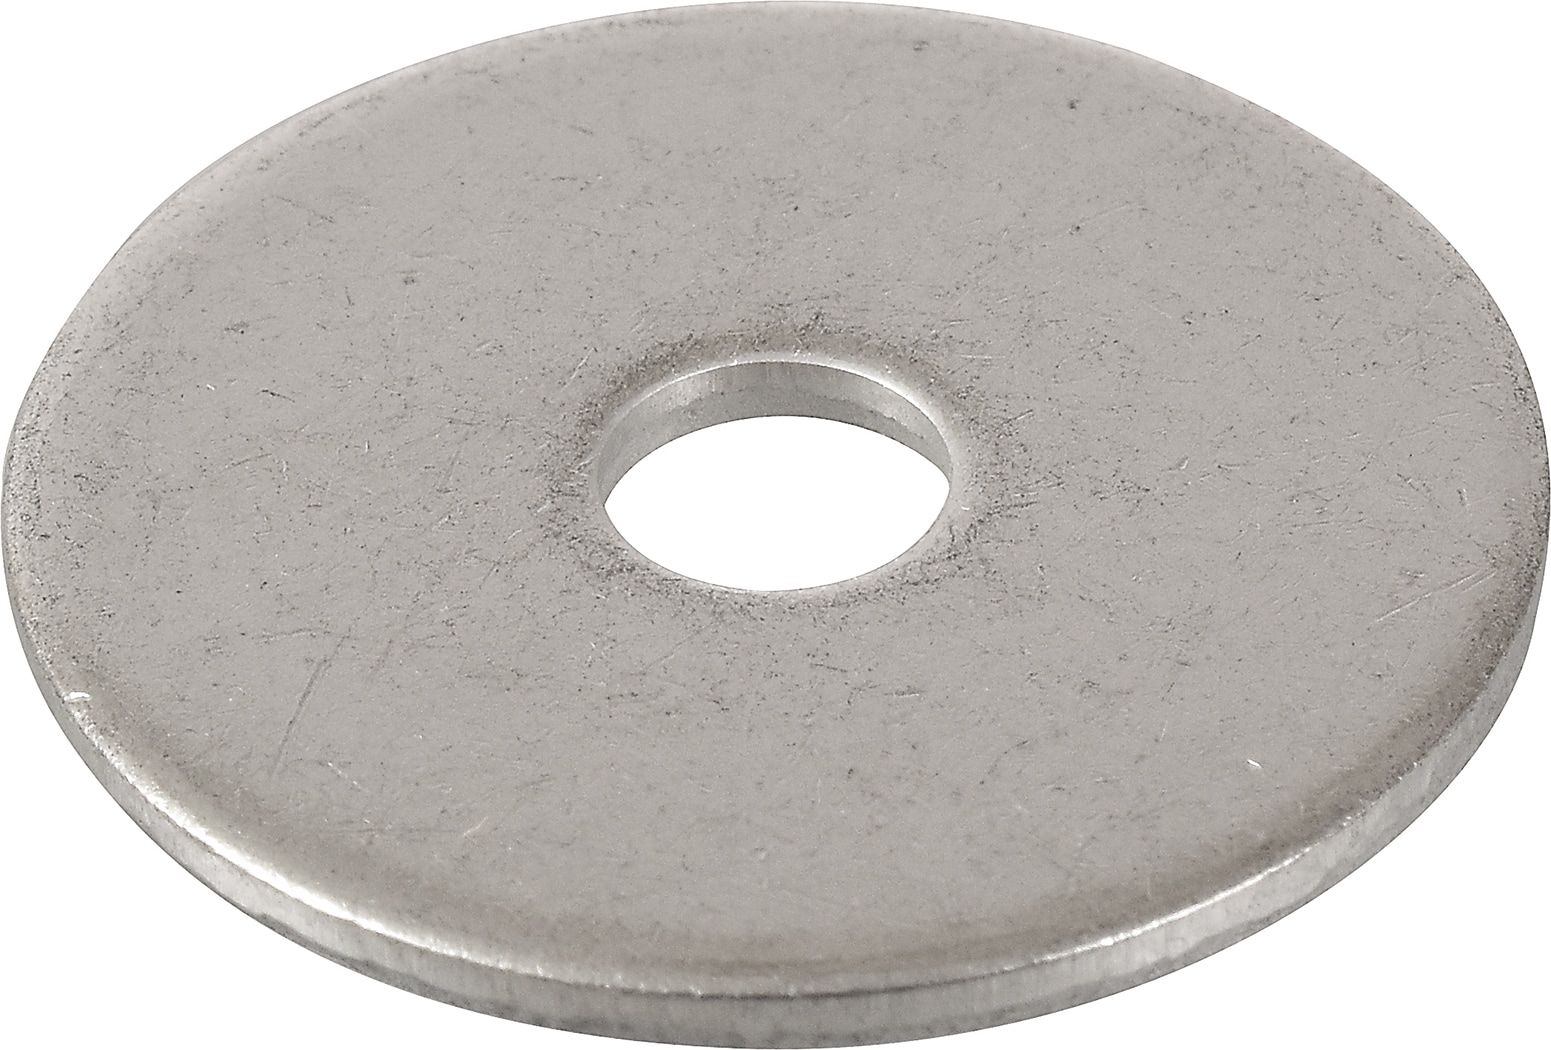 M4 M5 M6 Metric Flat/Fender/Repair Washers Extra Thick White Zinc Plated 